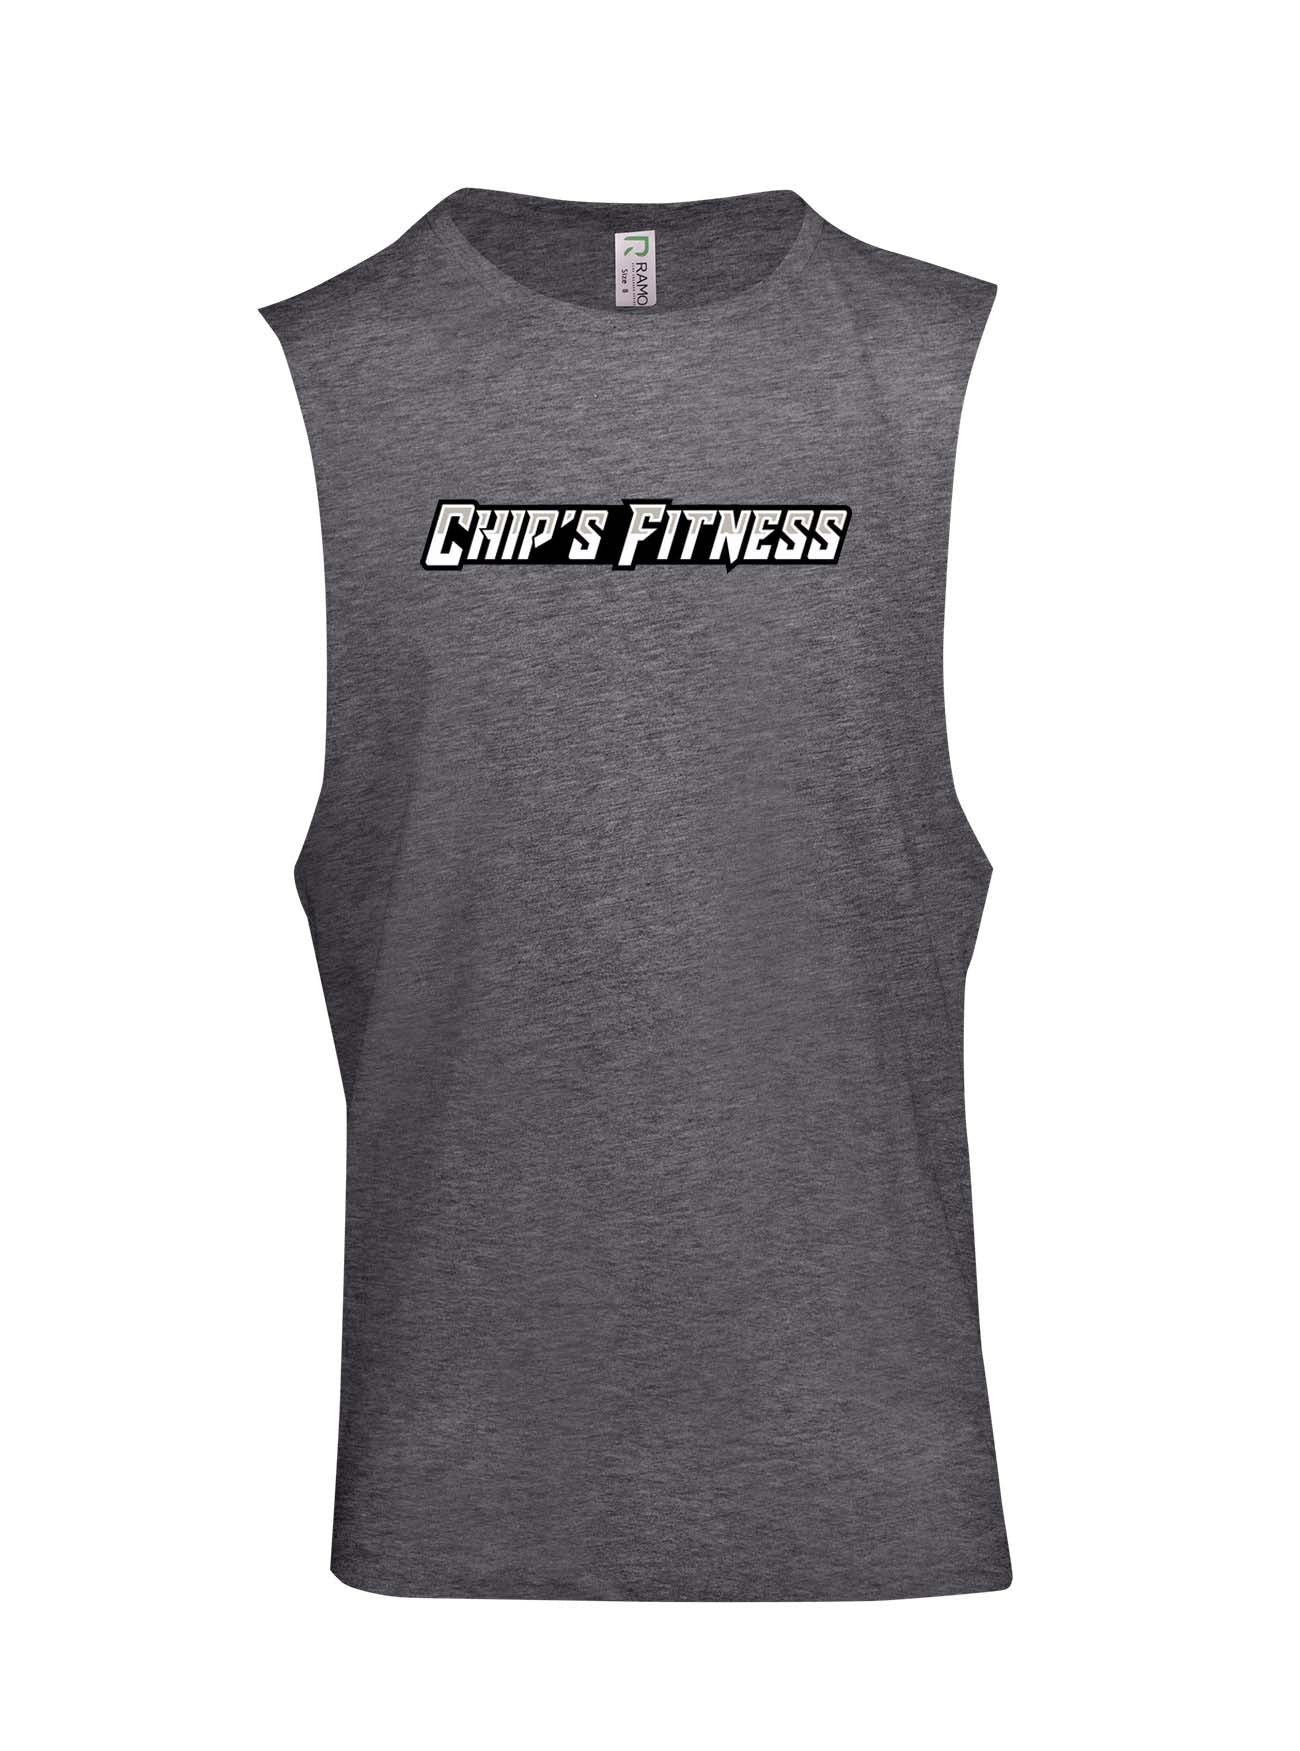 Chip's Fitness Double Sided Logo Muscle T